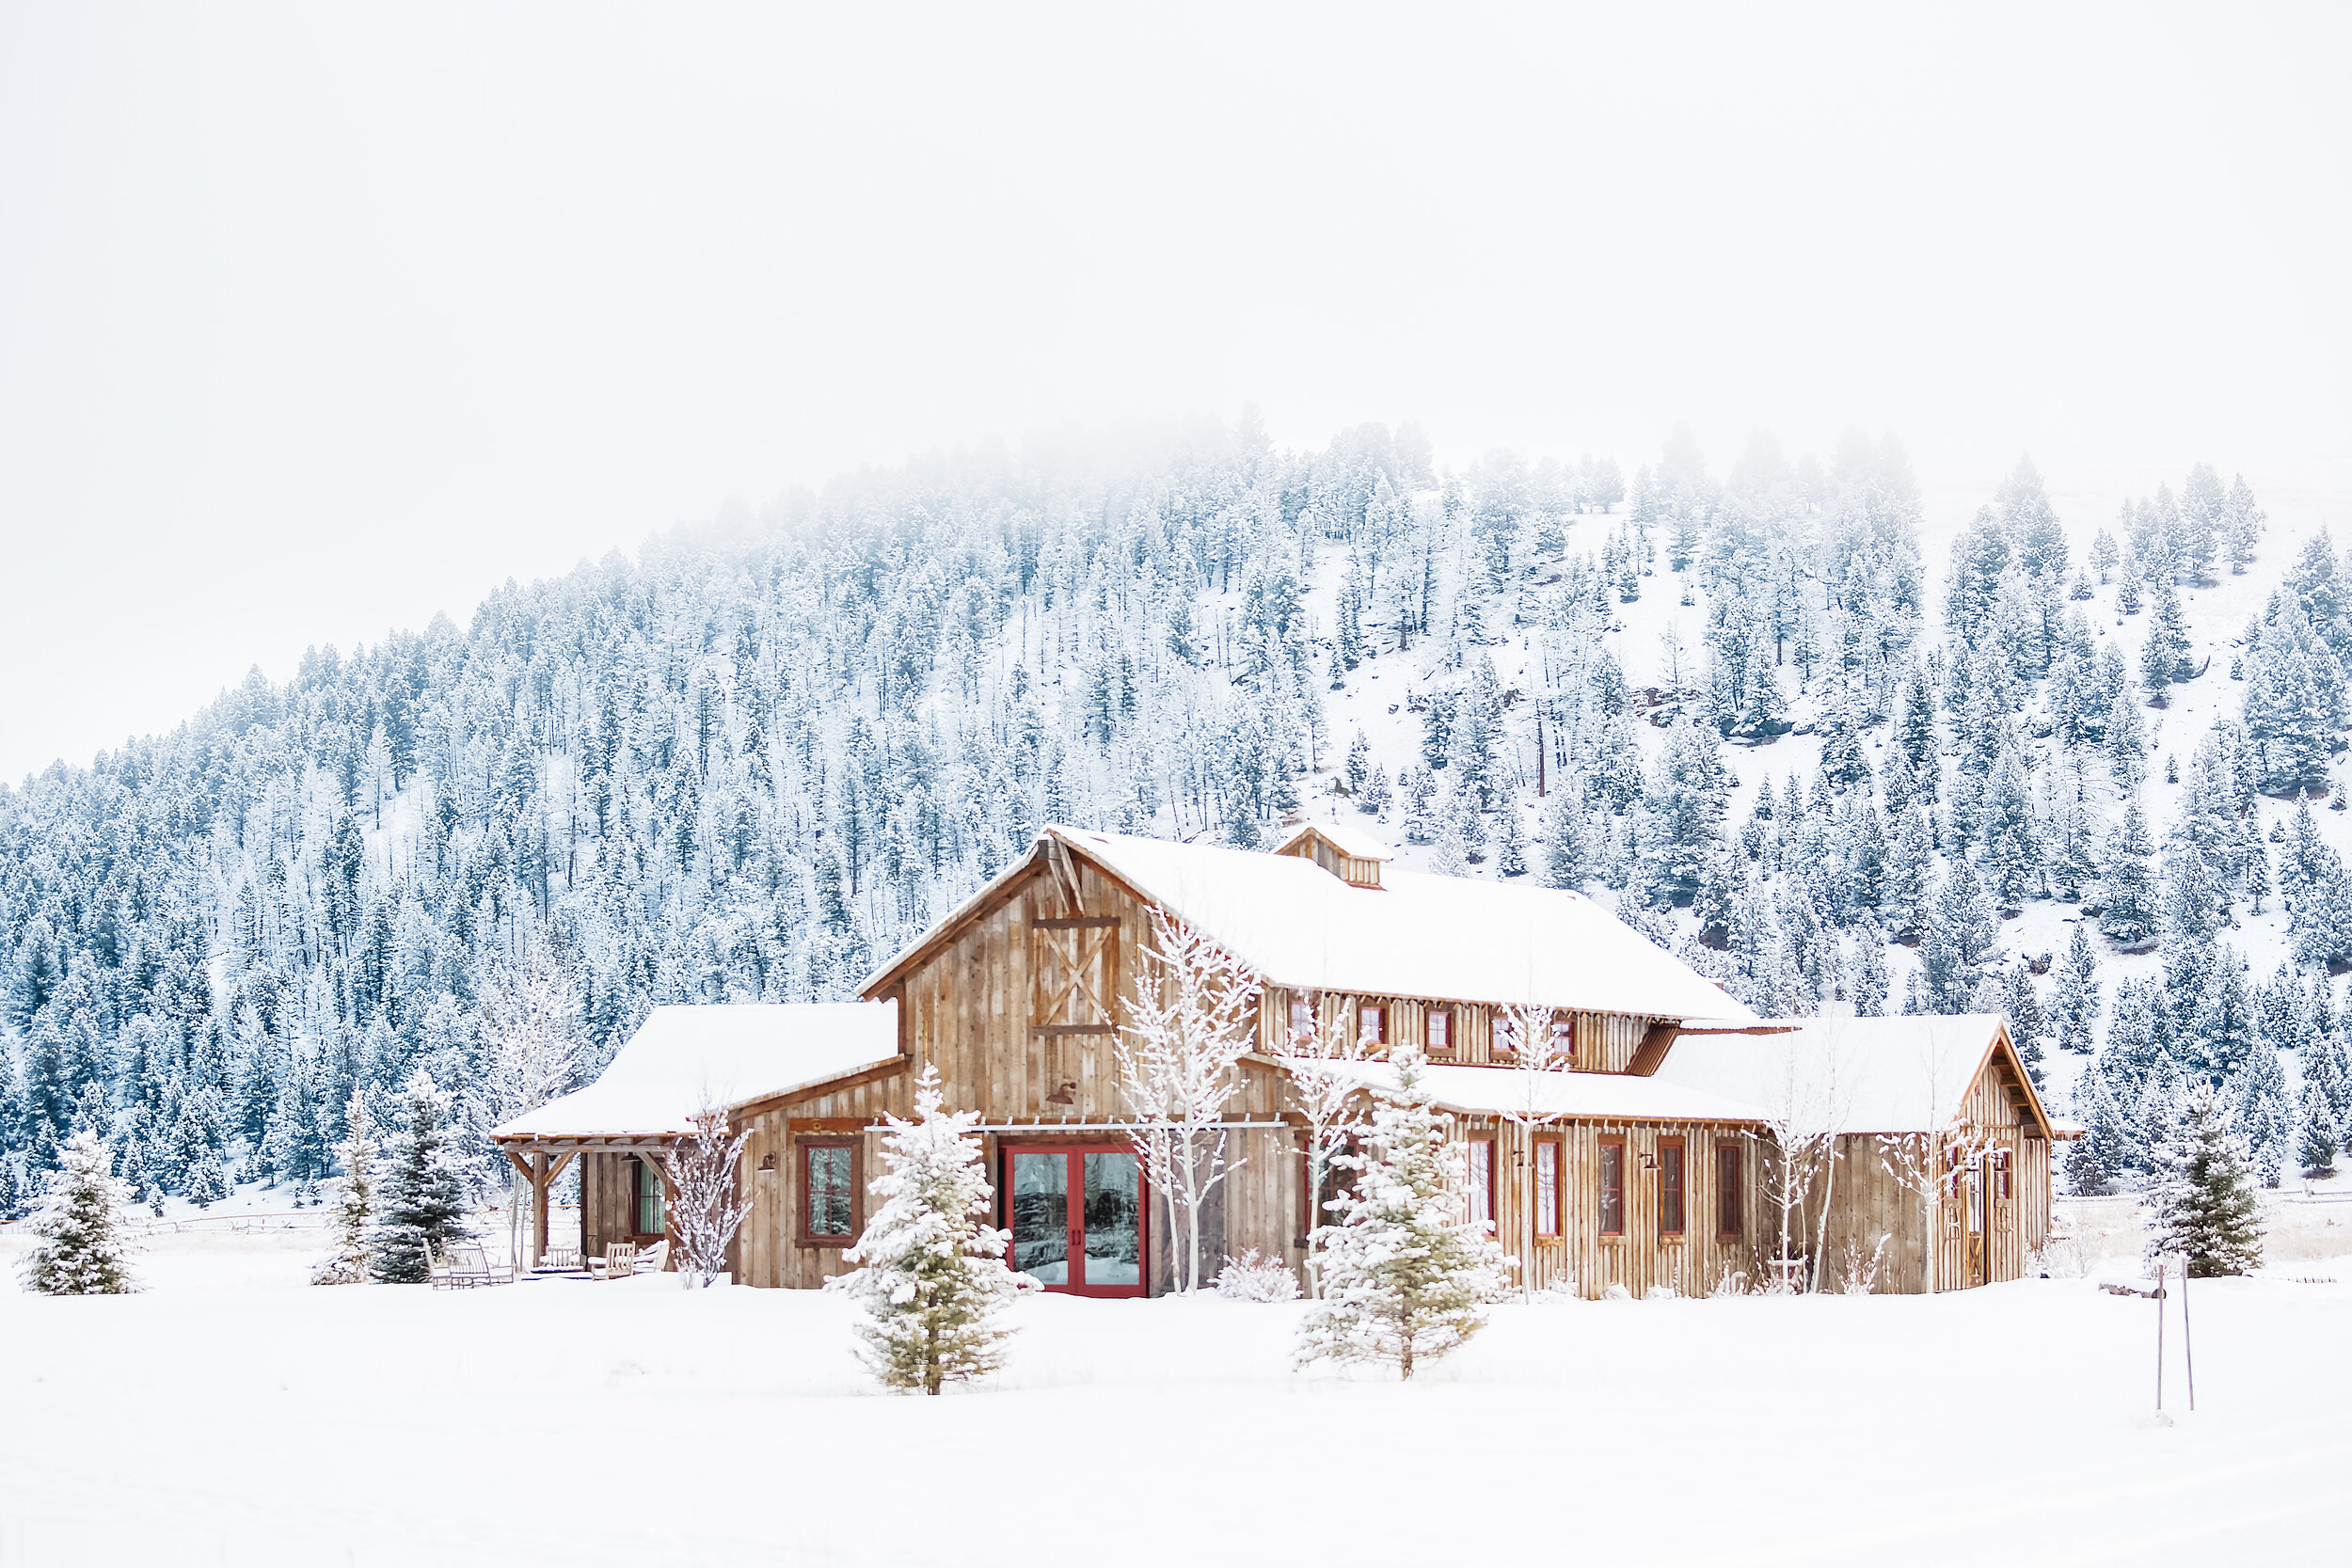   A very picturesque Buckle Barn in the winter (photo credit: The Ranch at Rock Creek)  